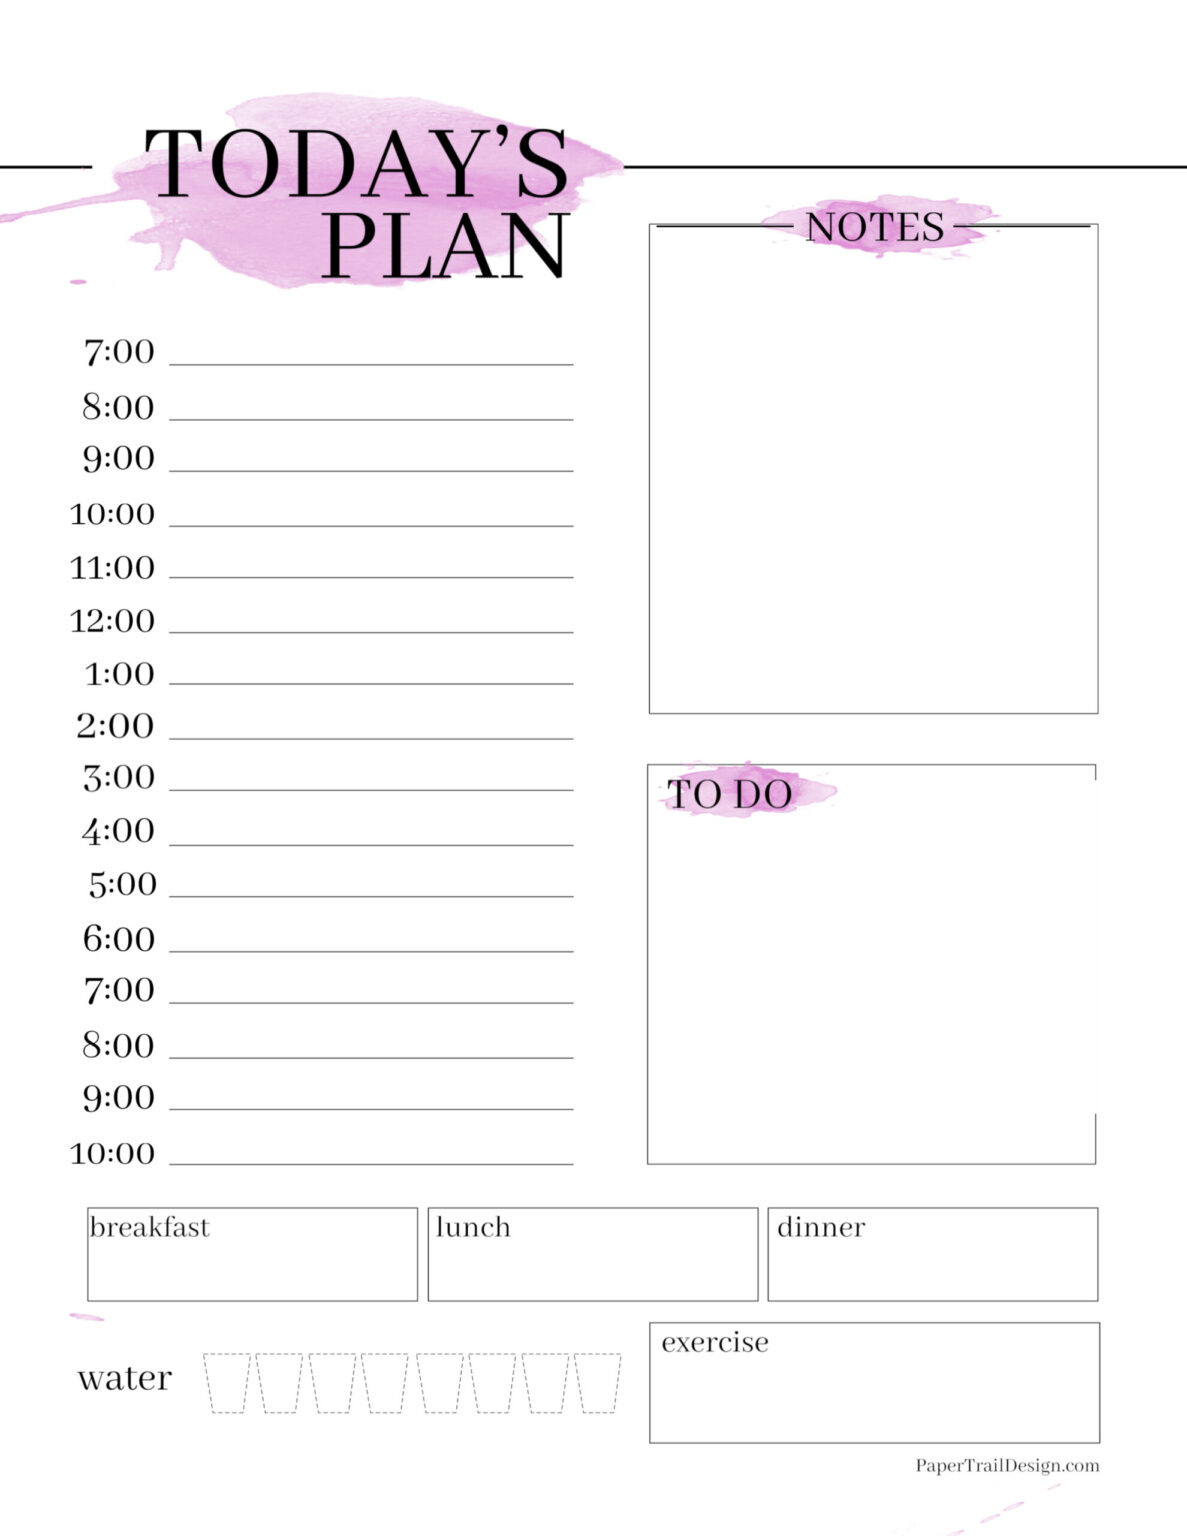 Daily Planner Printable - Watercolor - Paper Trail Design